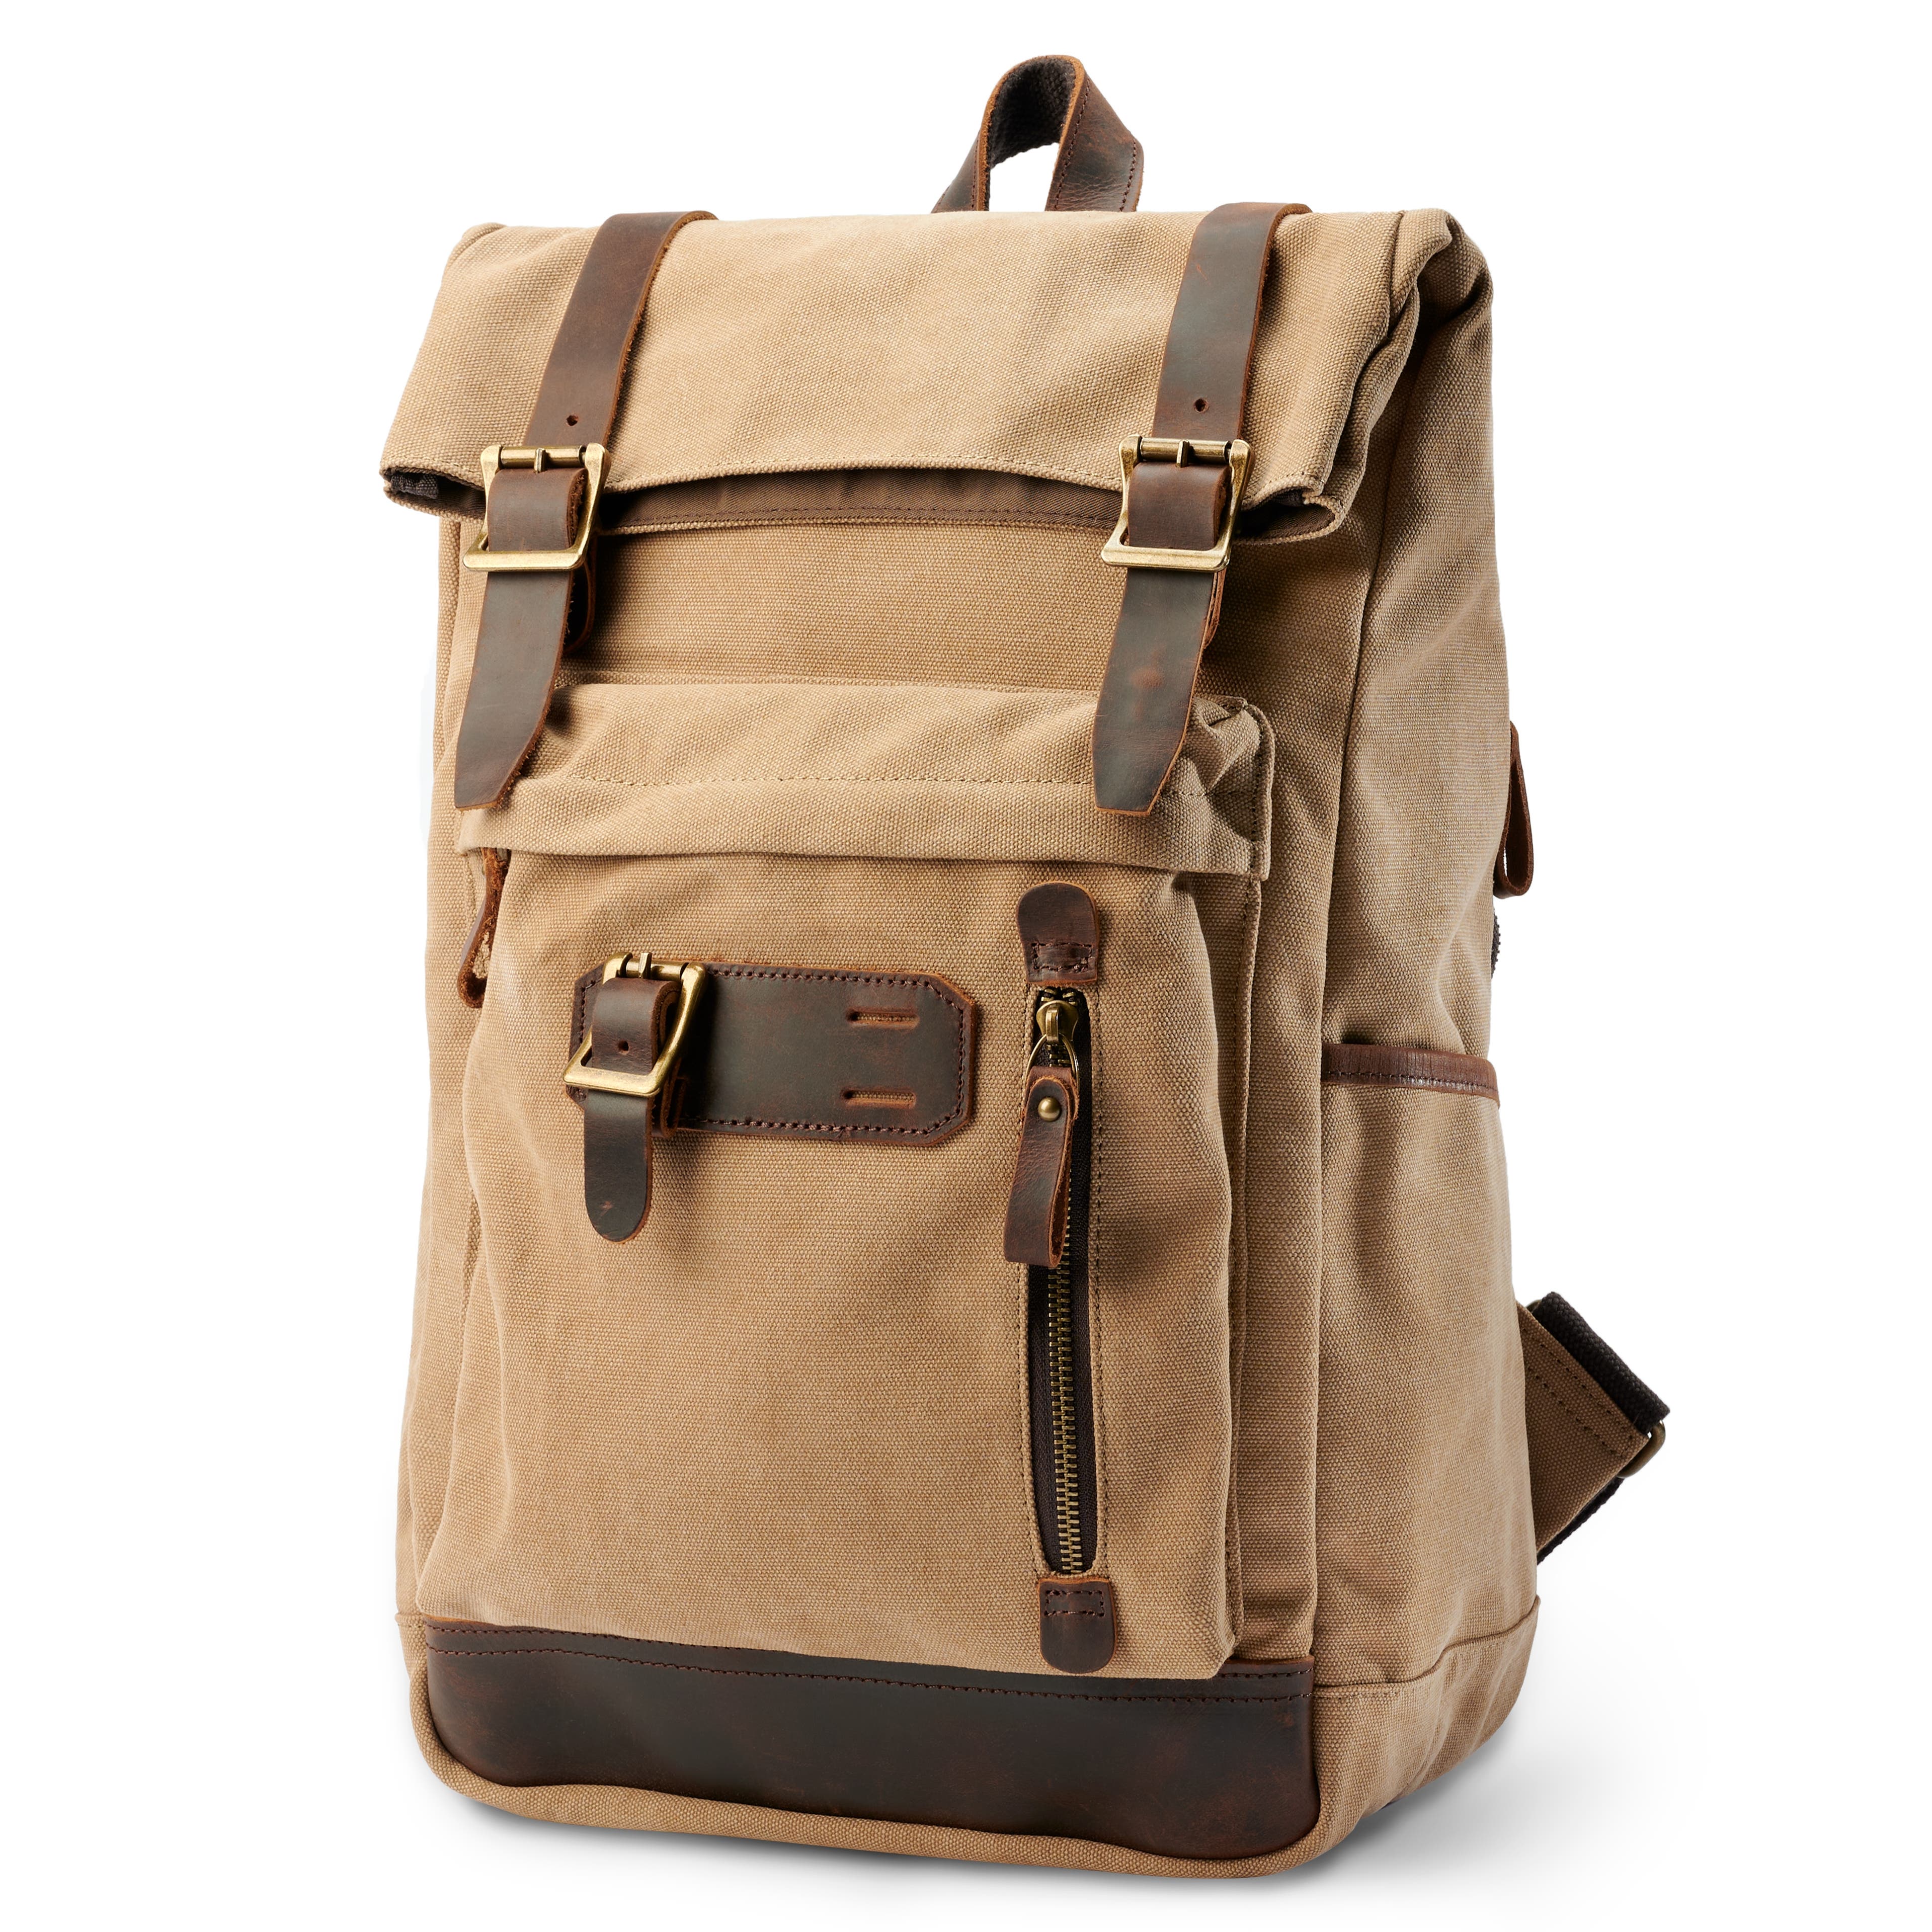 Rugged Vintage-Style Tan Canvas & Leather Backpack